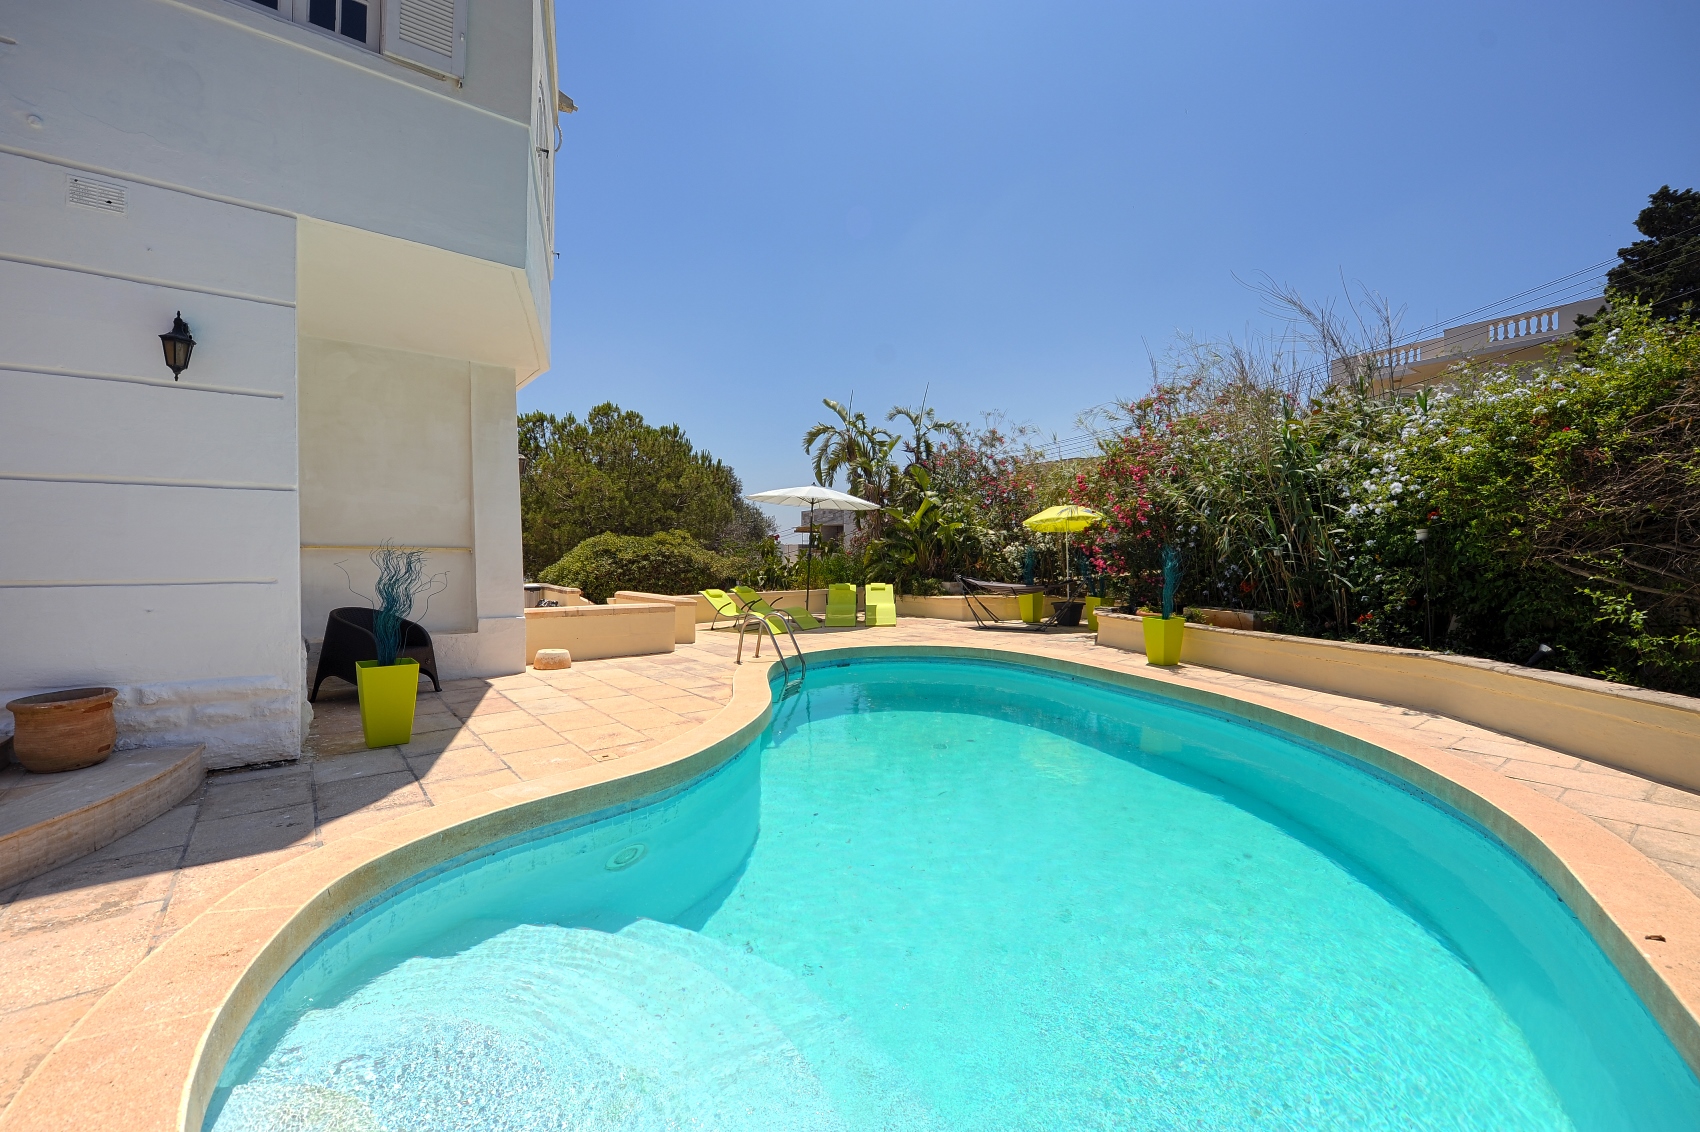 High Ridge, Madliena – Four Bedroom Villa With Pool And Views For Rent